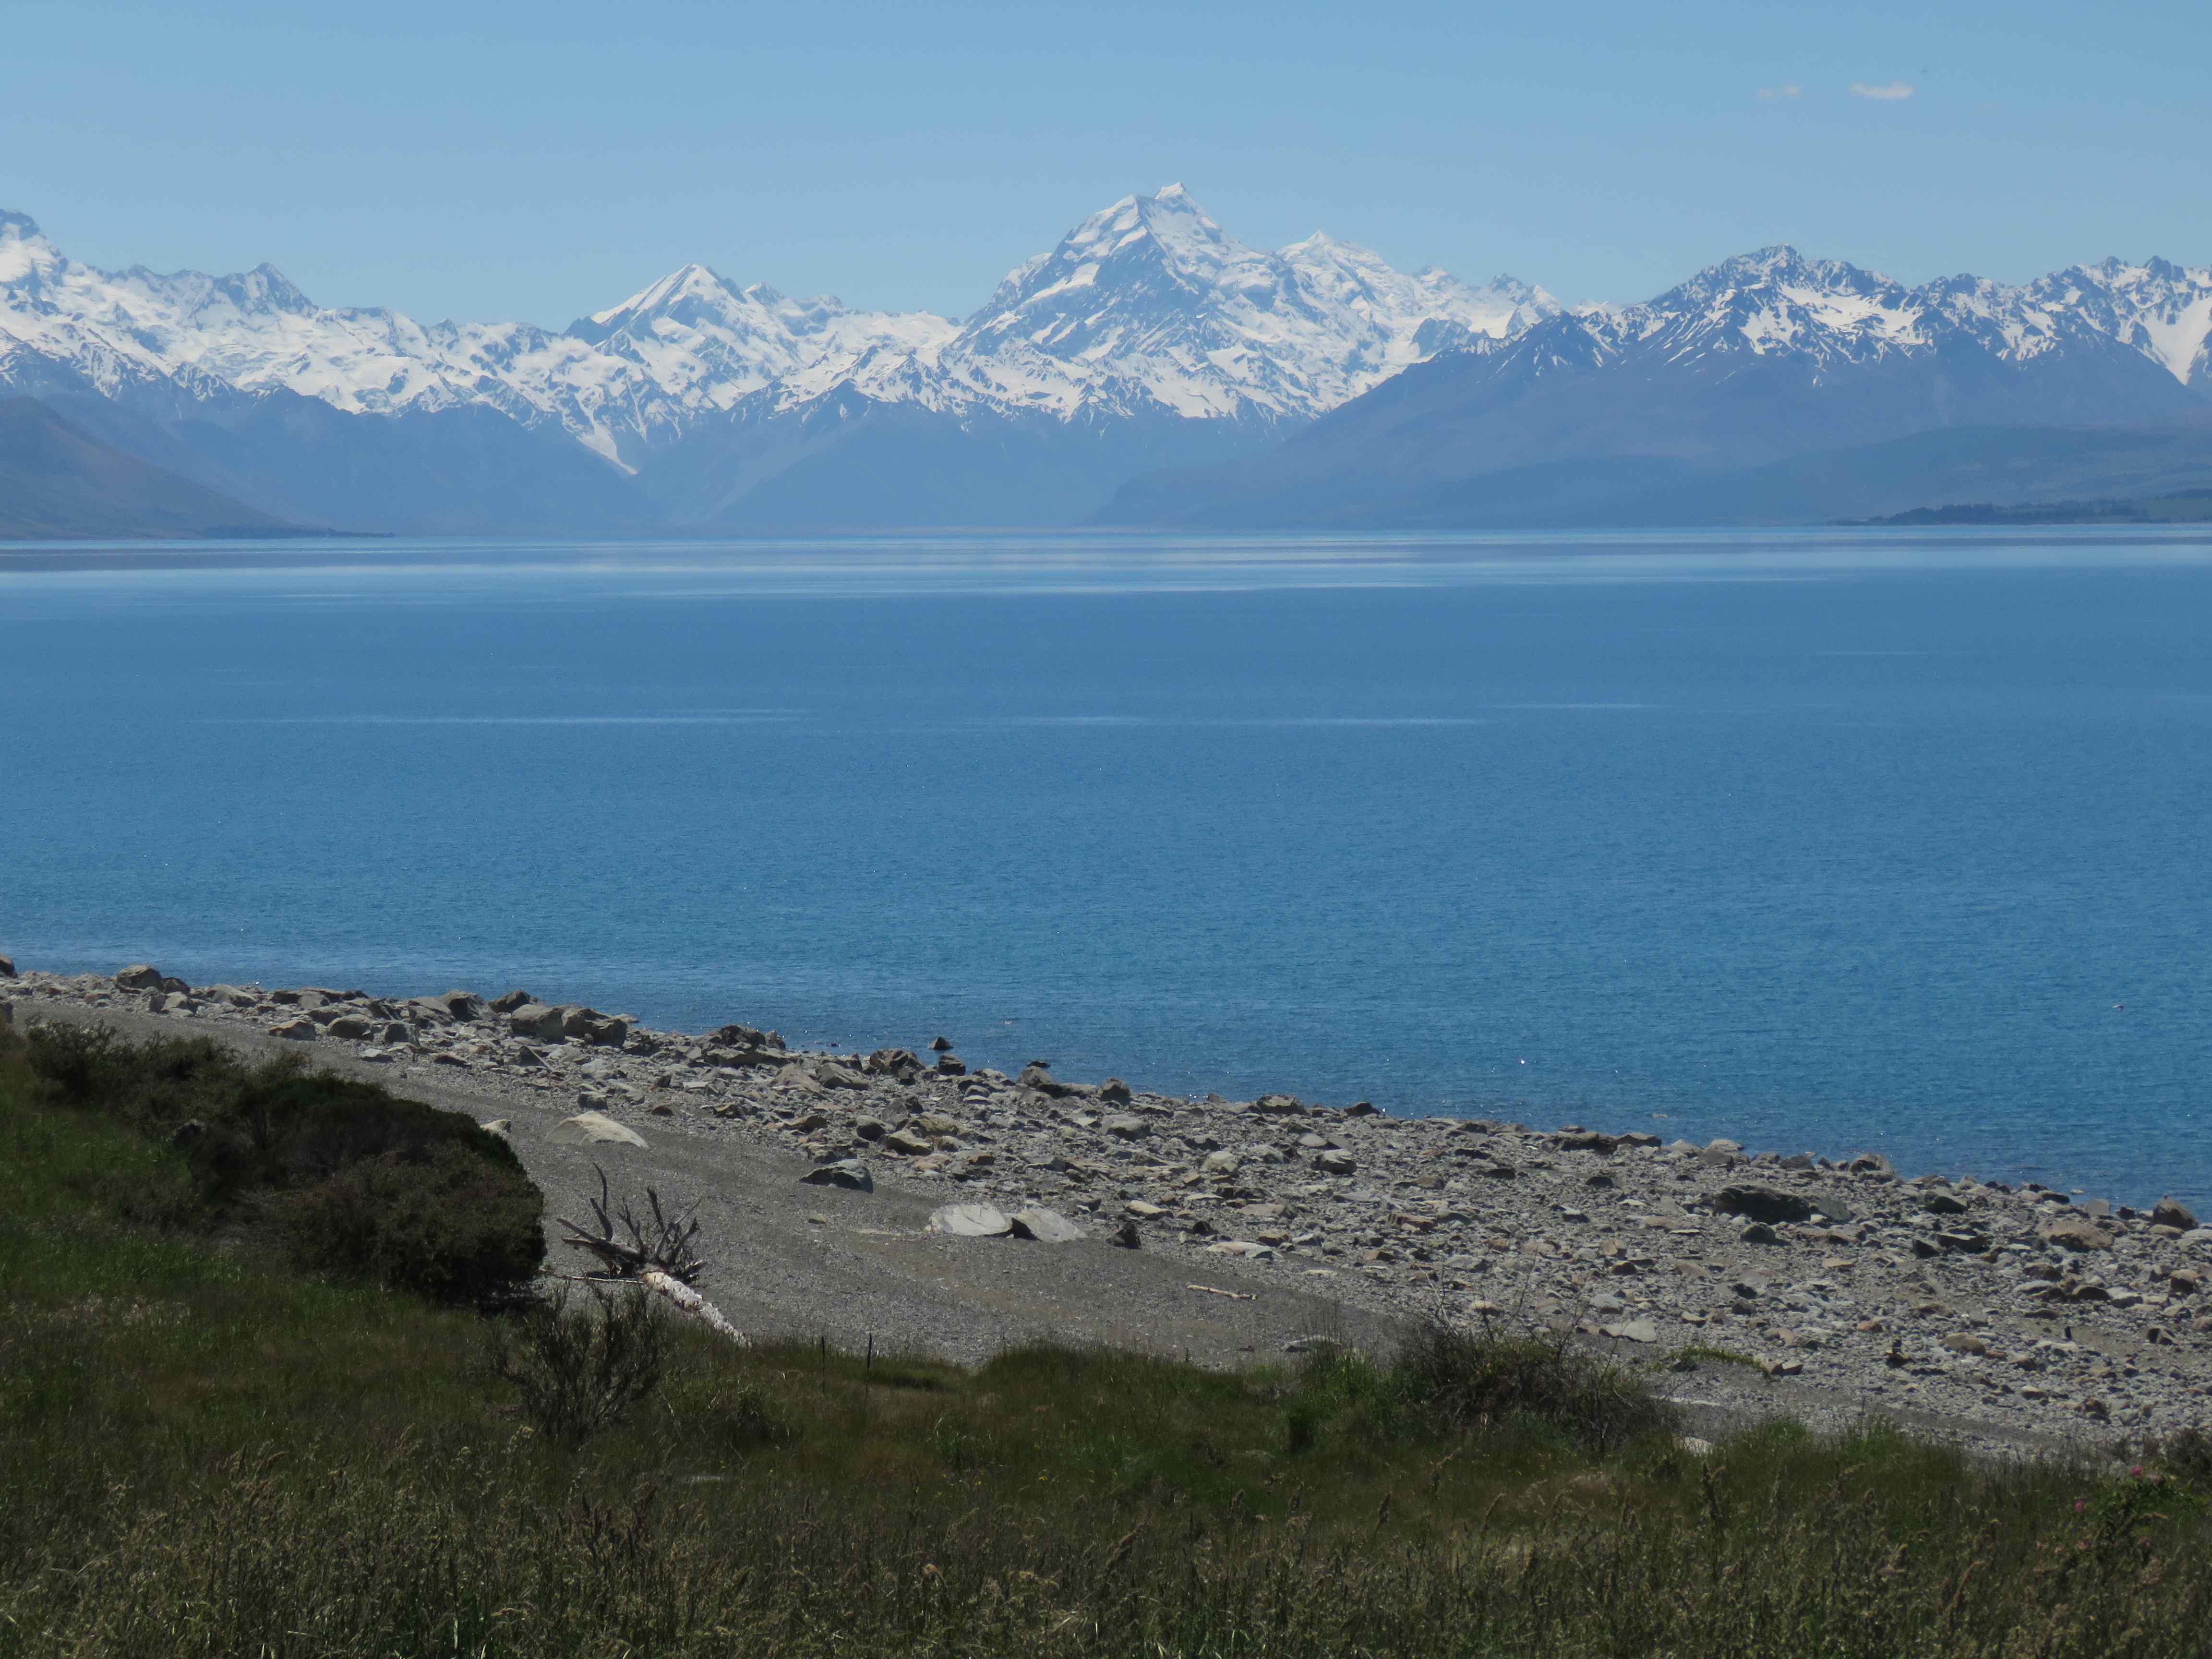 WFR1719.20. Lake Pukaki has exception scenery but can you just throw a cast and catch a fish